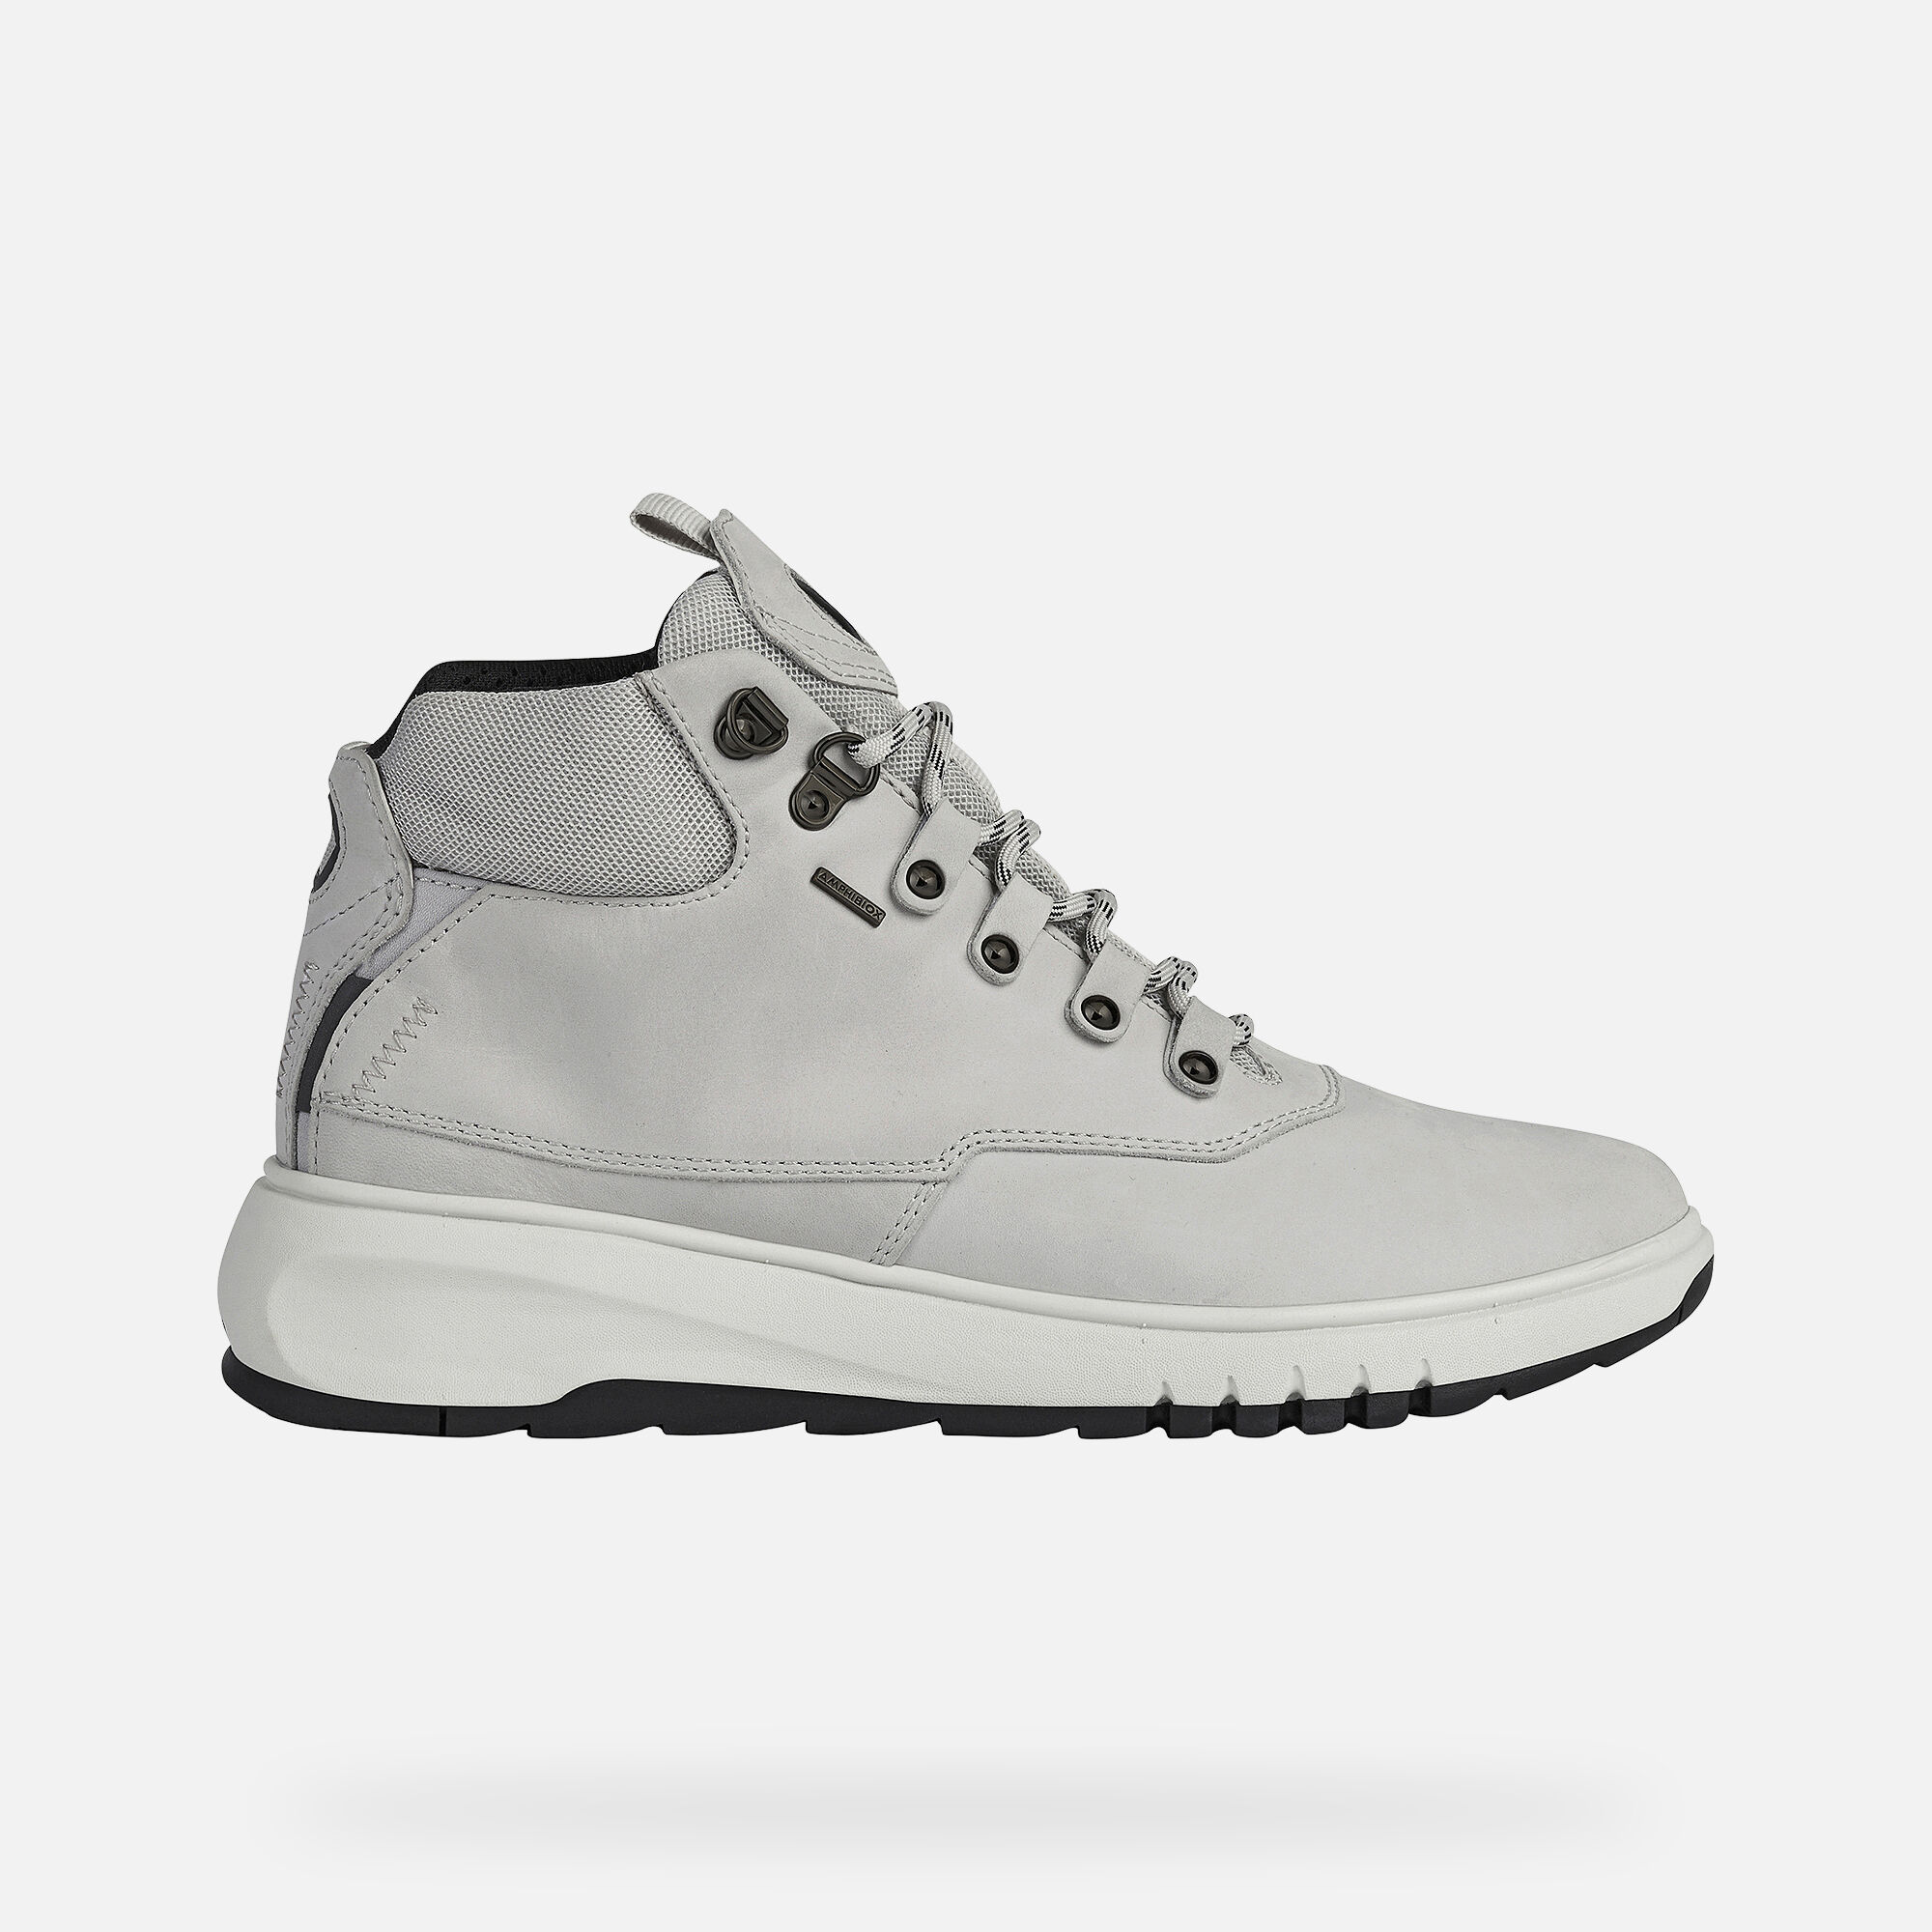 geox grey boots